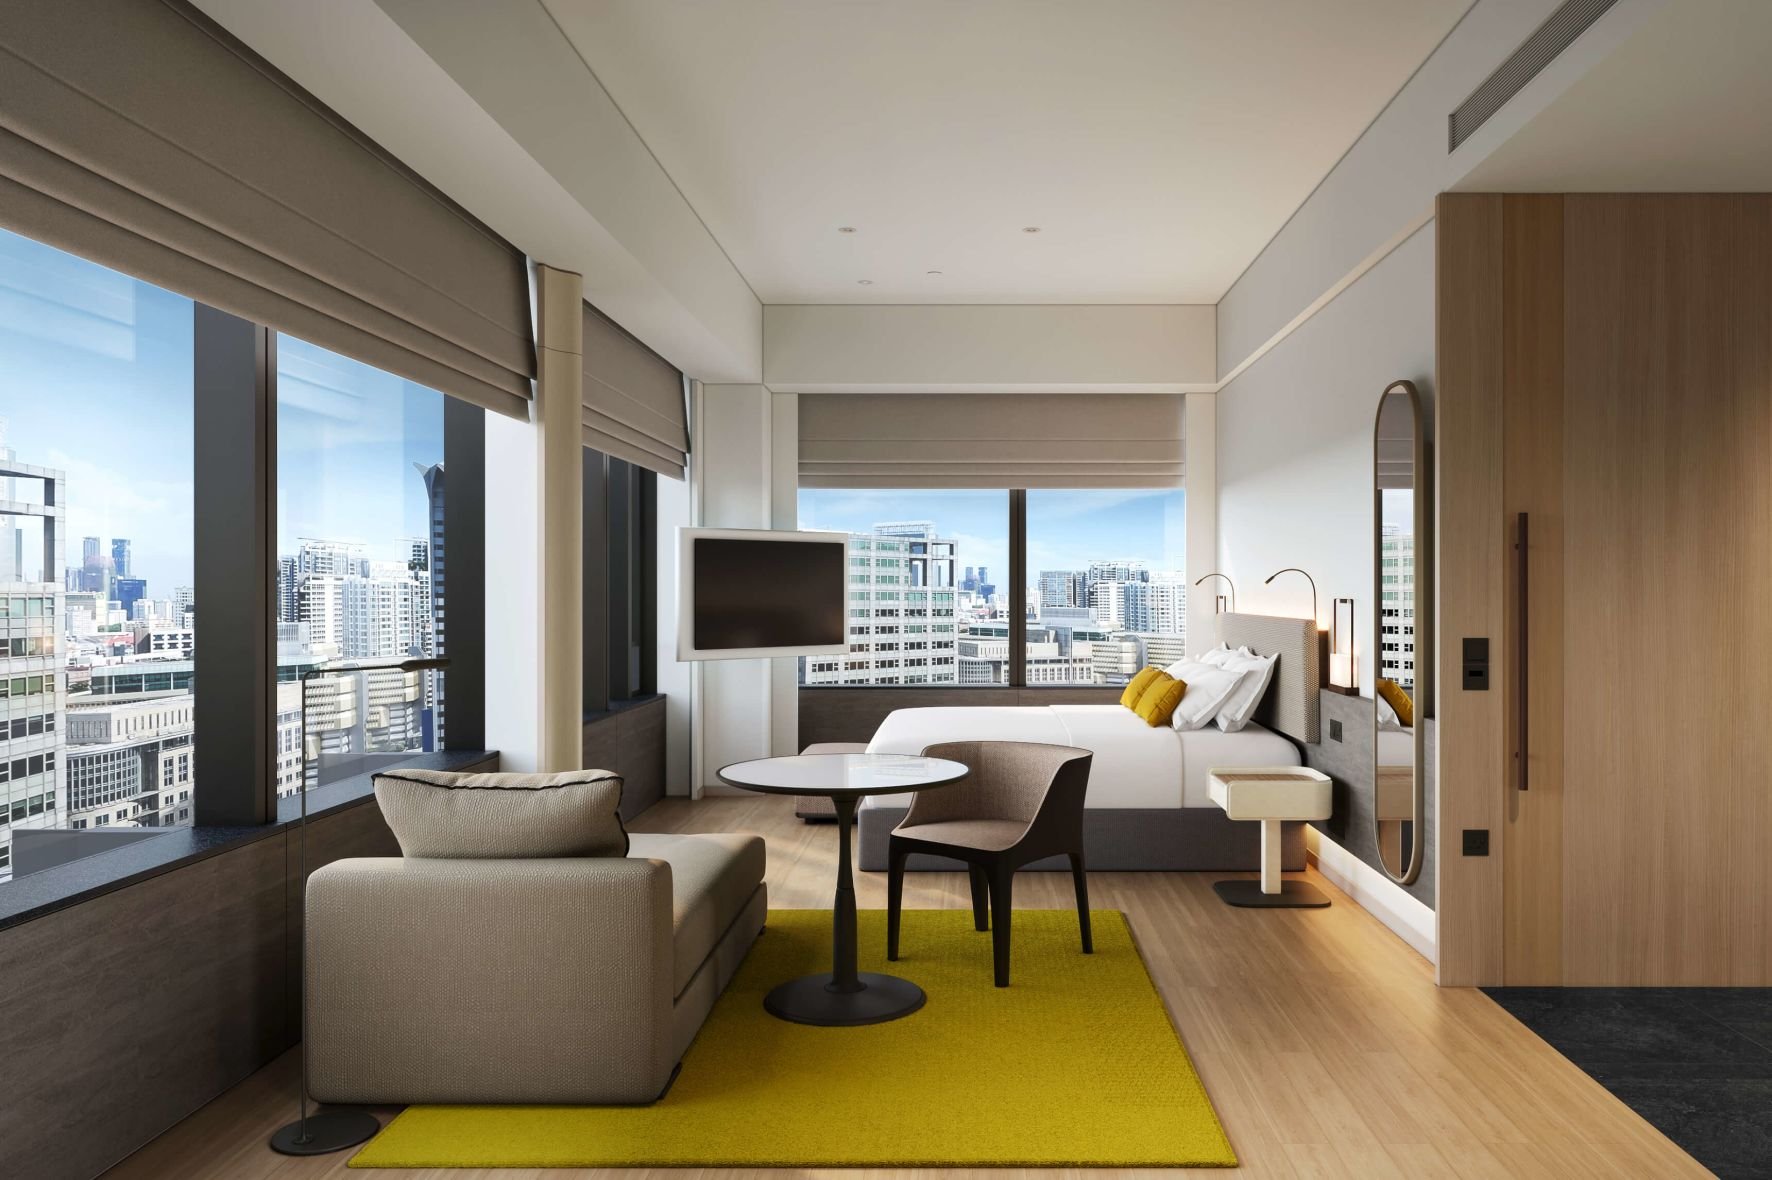 The first hotel in the COMO brand’s home country, COMO Metropolitan Singapore has opened in the Lion City